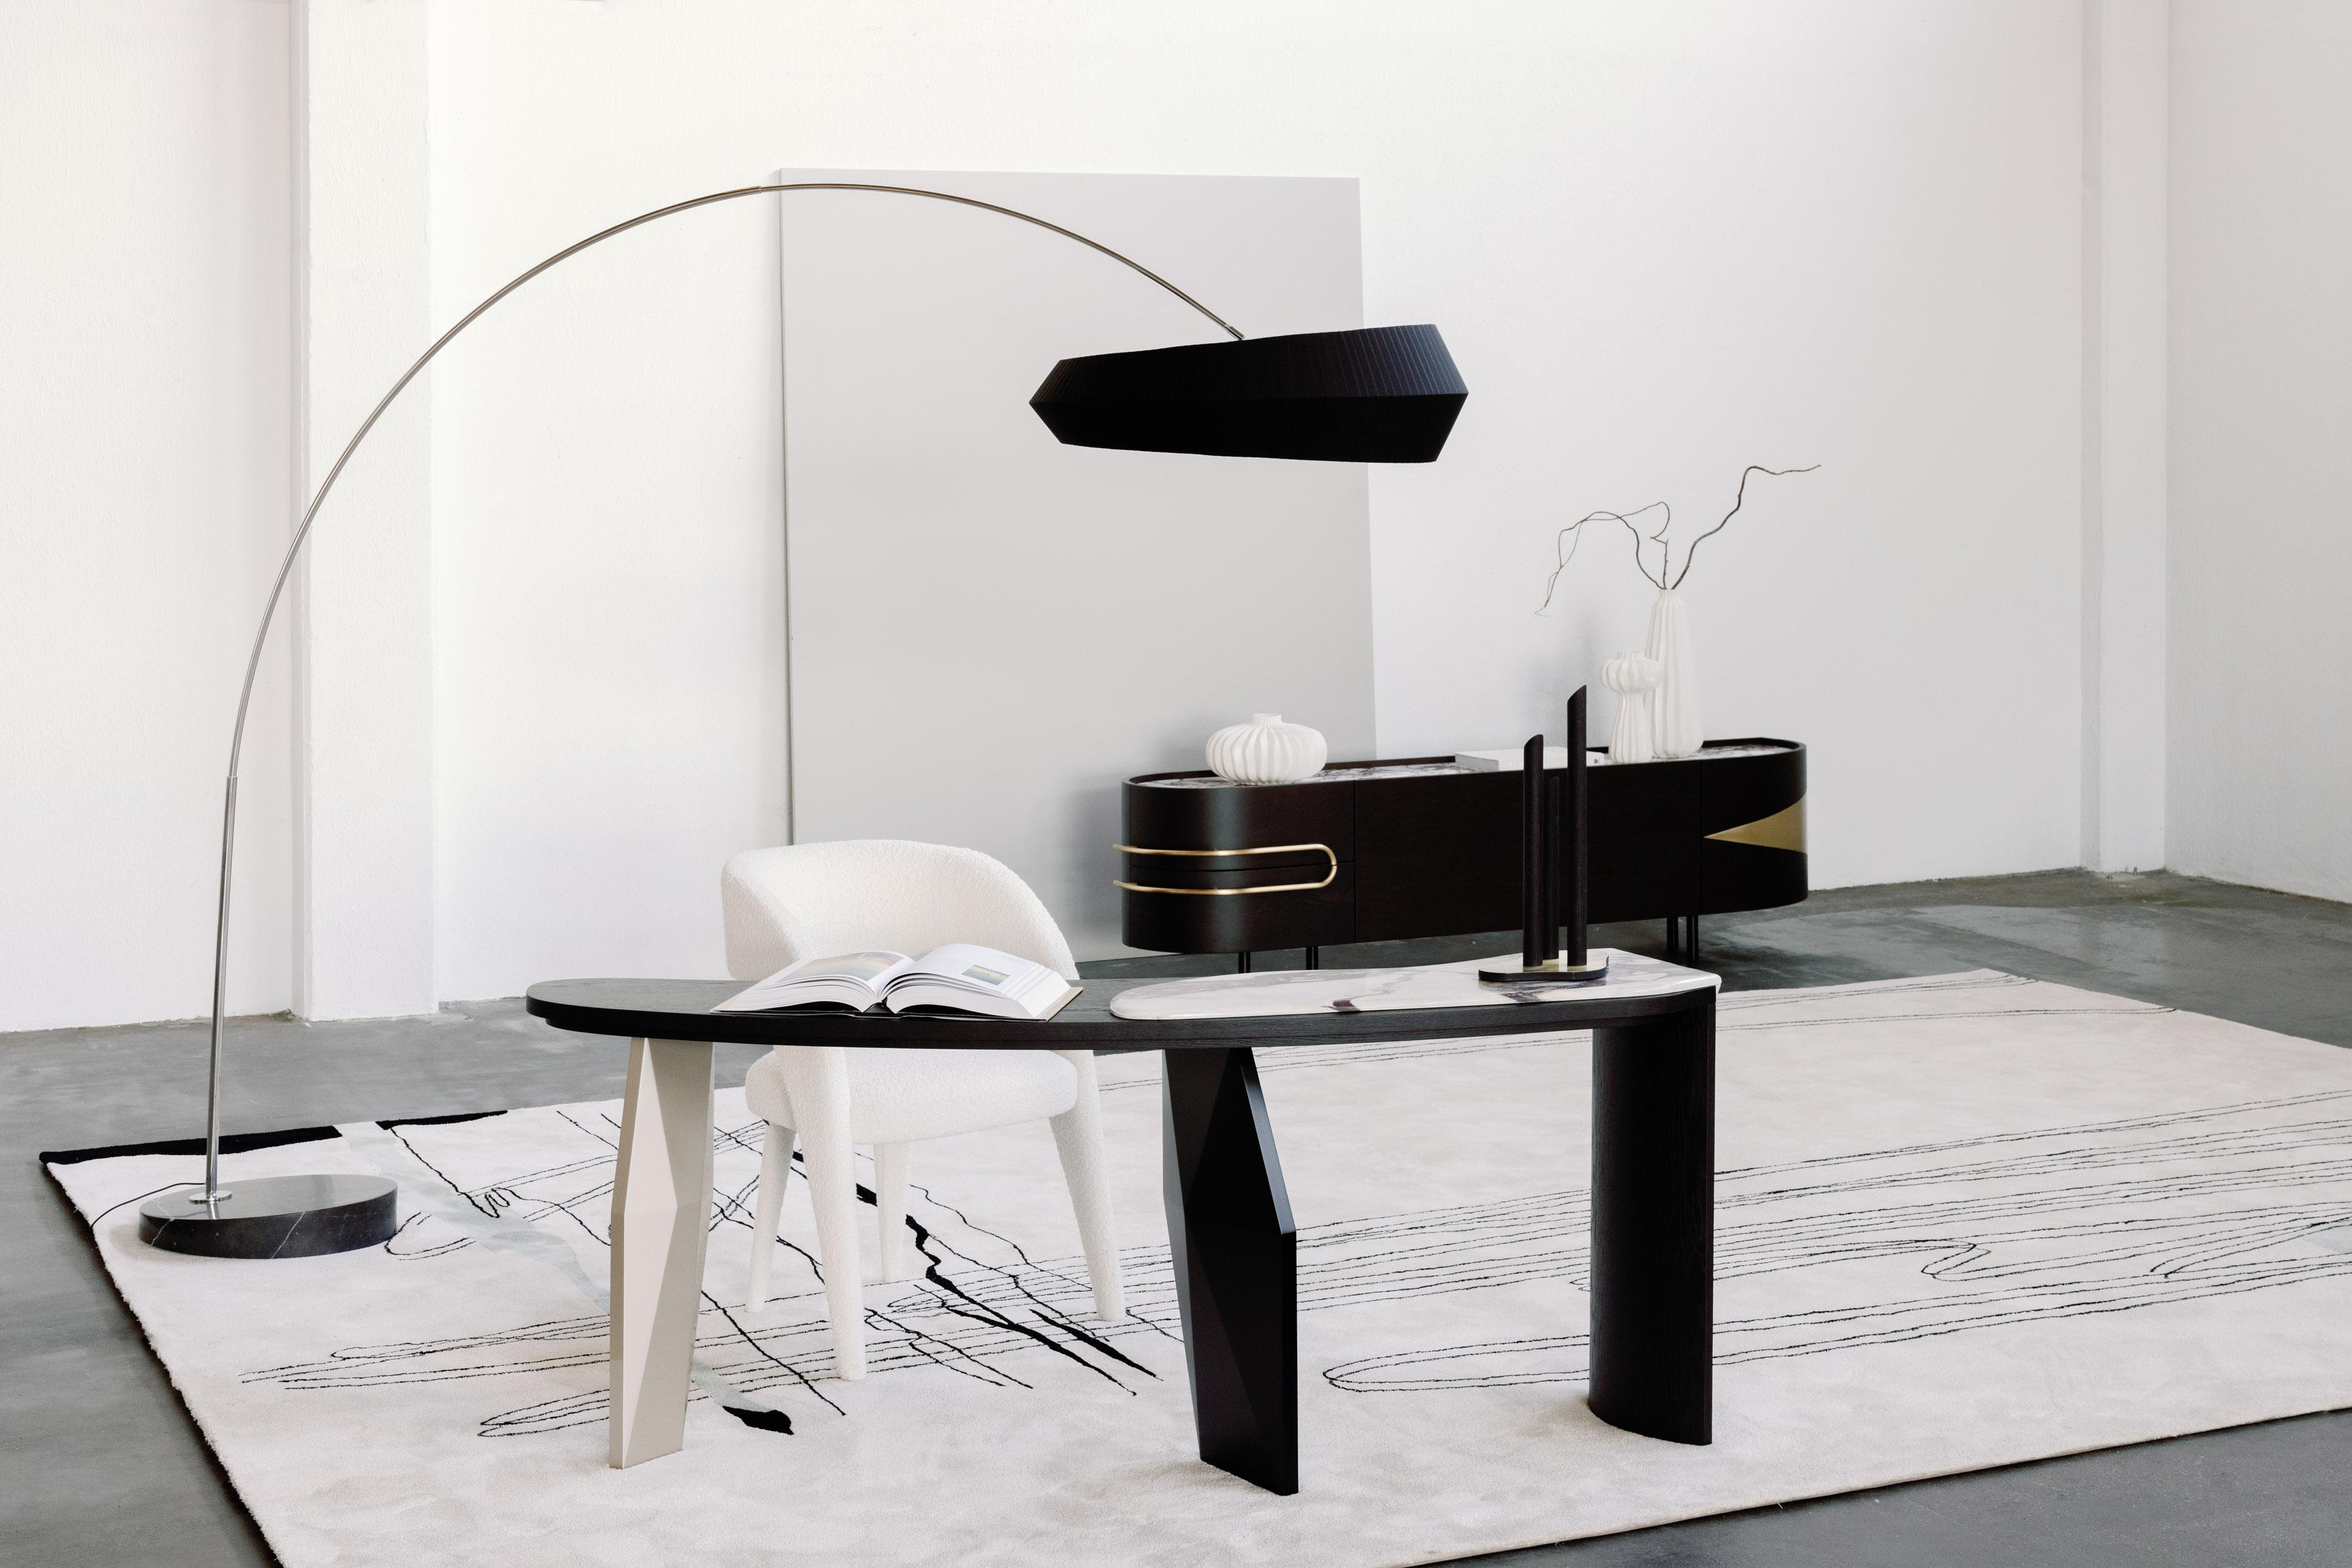 Hand-Crafted Modern Black Sublime Arc Floor Lamp, Marble, Handmade in Portugal by Greenapple For Sale